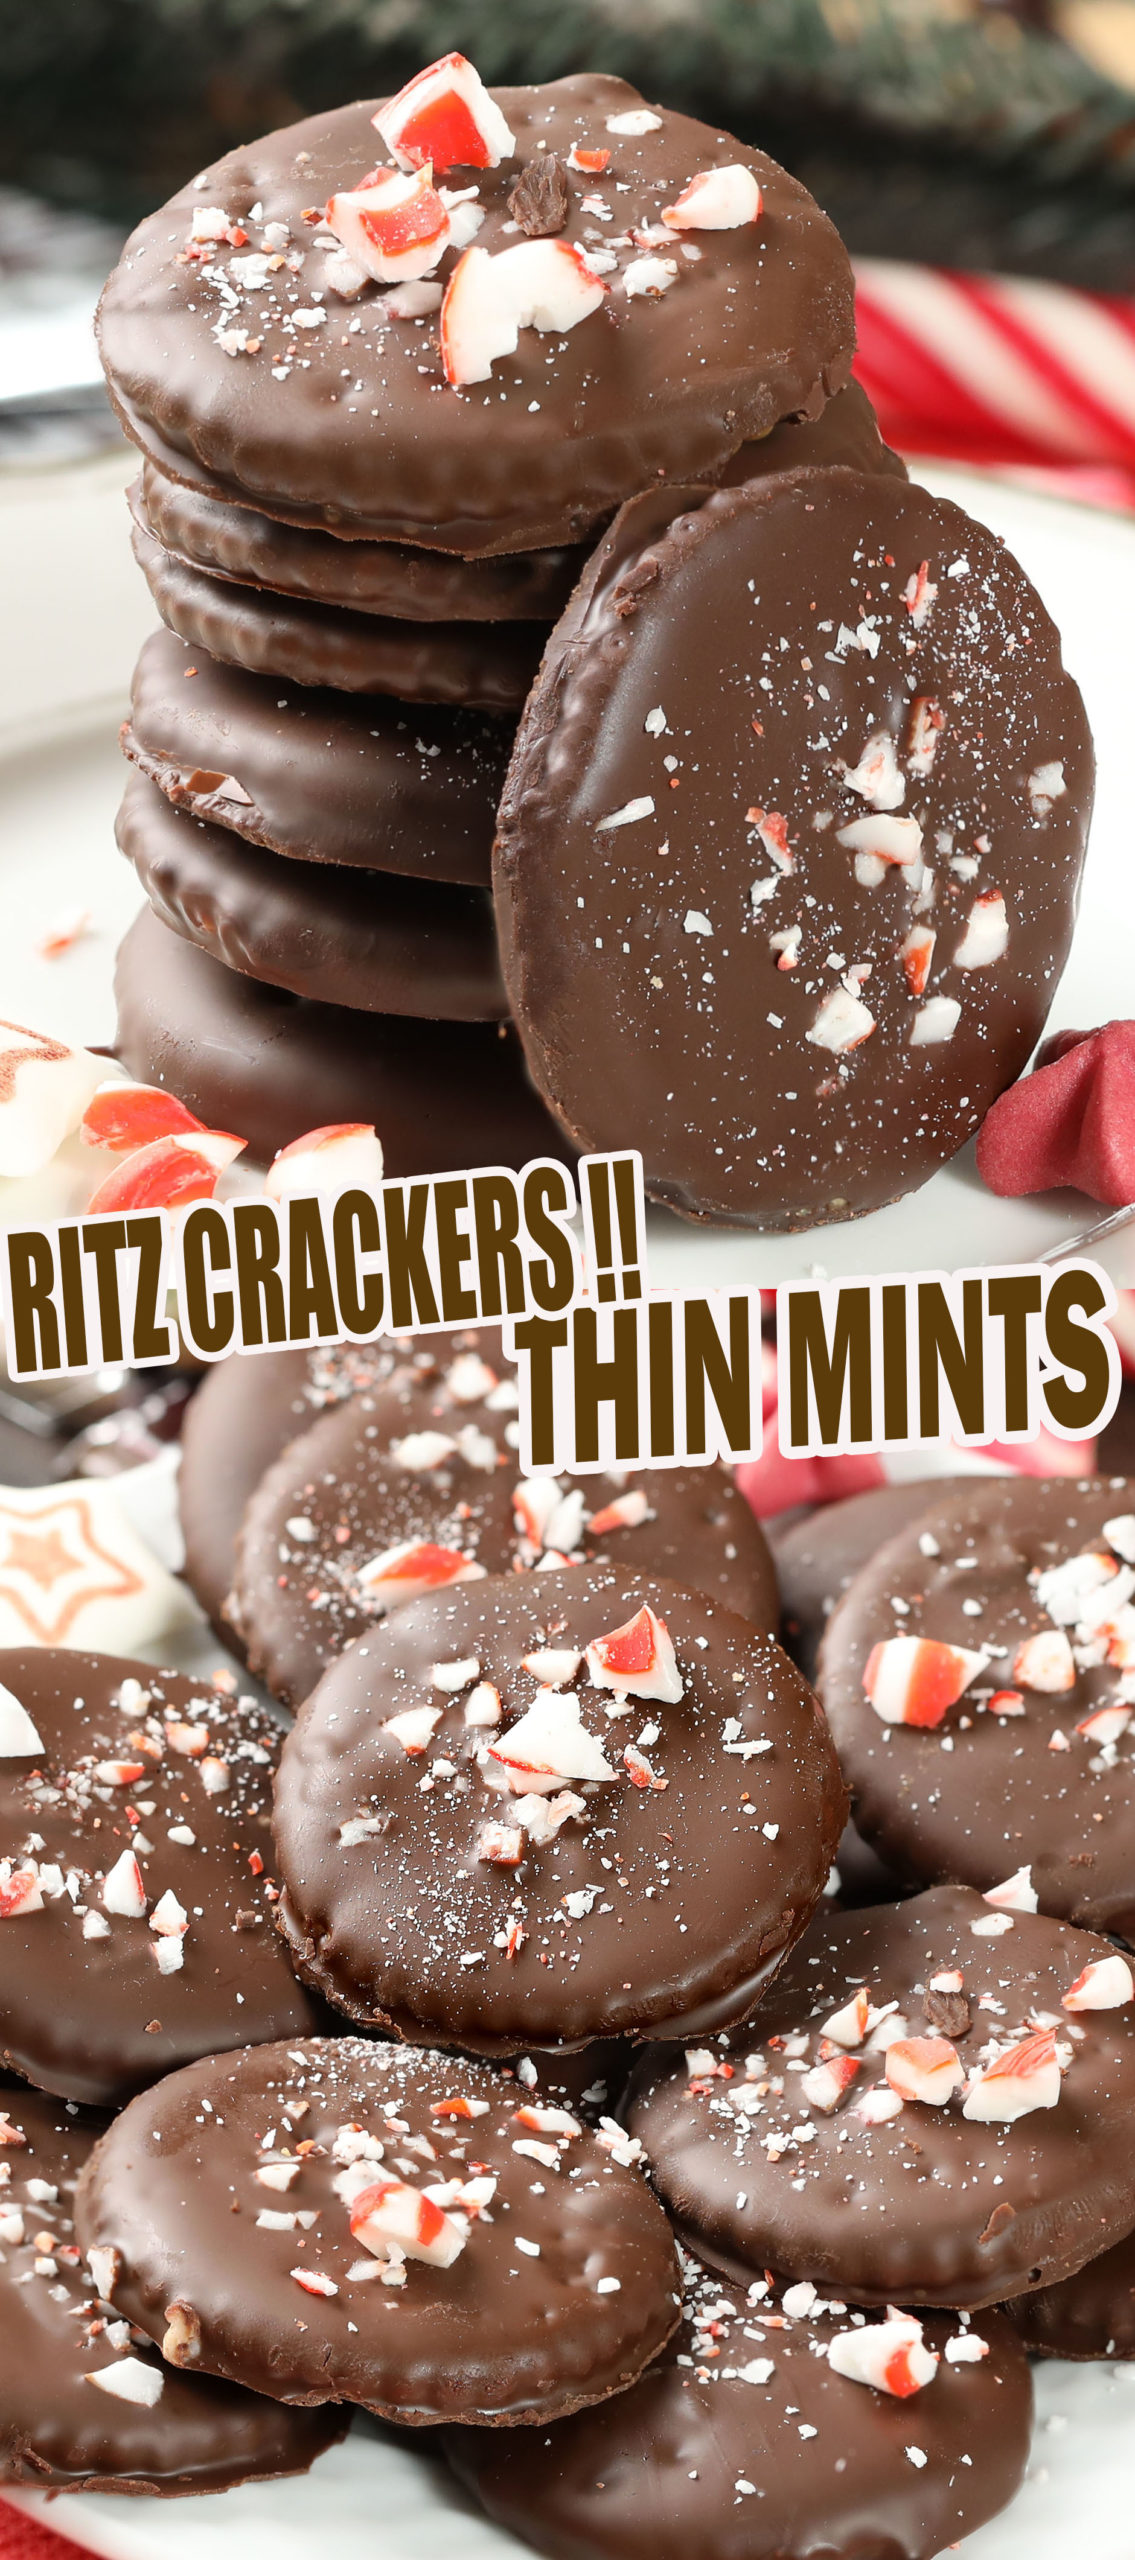 Thin Mint Ritz Crackers – an awesomely easy-to-make salty-sweet, peppermint-chocolate combo, using Ritz crackers, melted chocolate, and peppermint extract! Trust me. A match made in Heaven.